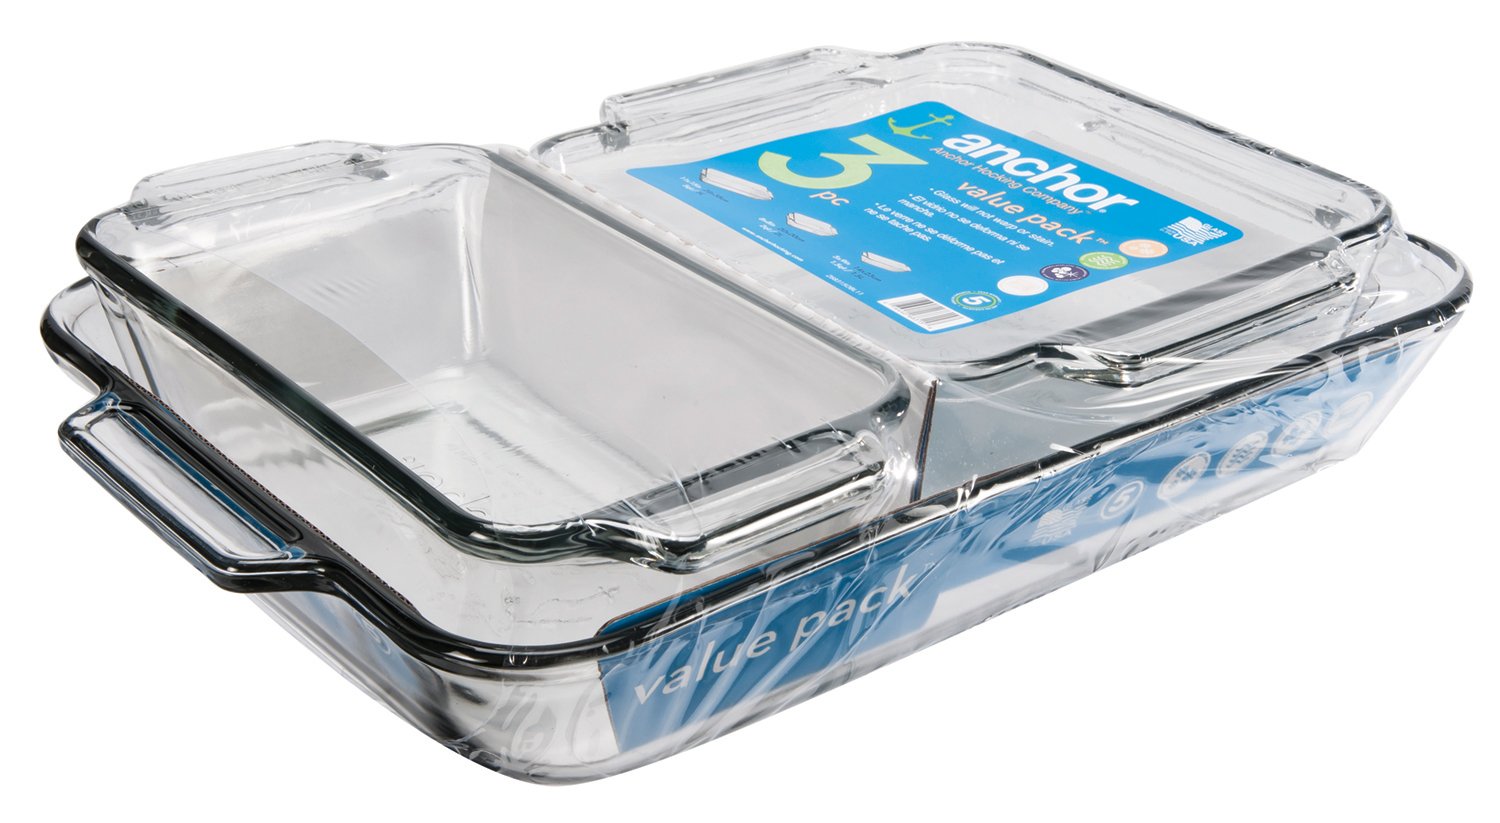 Anchor Hocking Oven Basics 3-Piece Glass Bakeware Set with Square Cake, Rectangular, and Loaf Baking Dishes